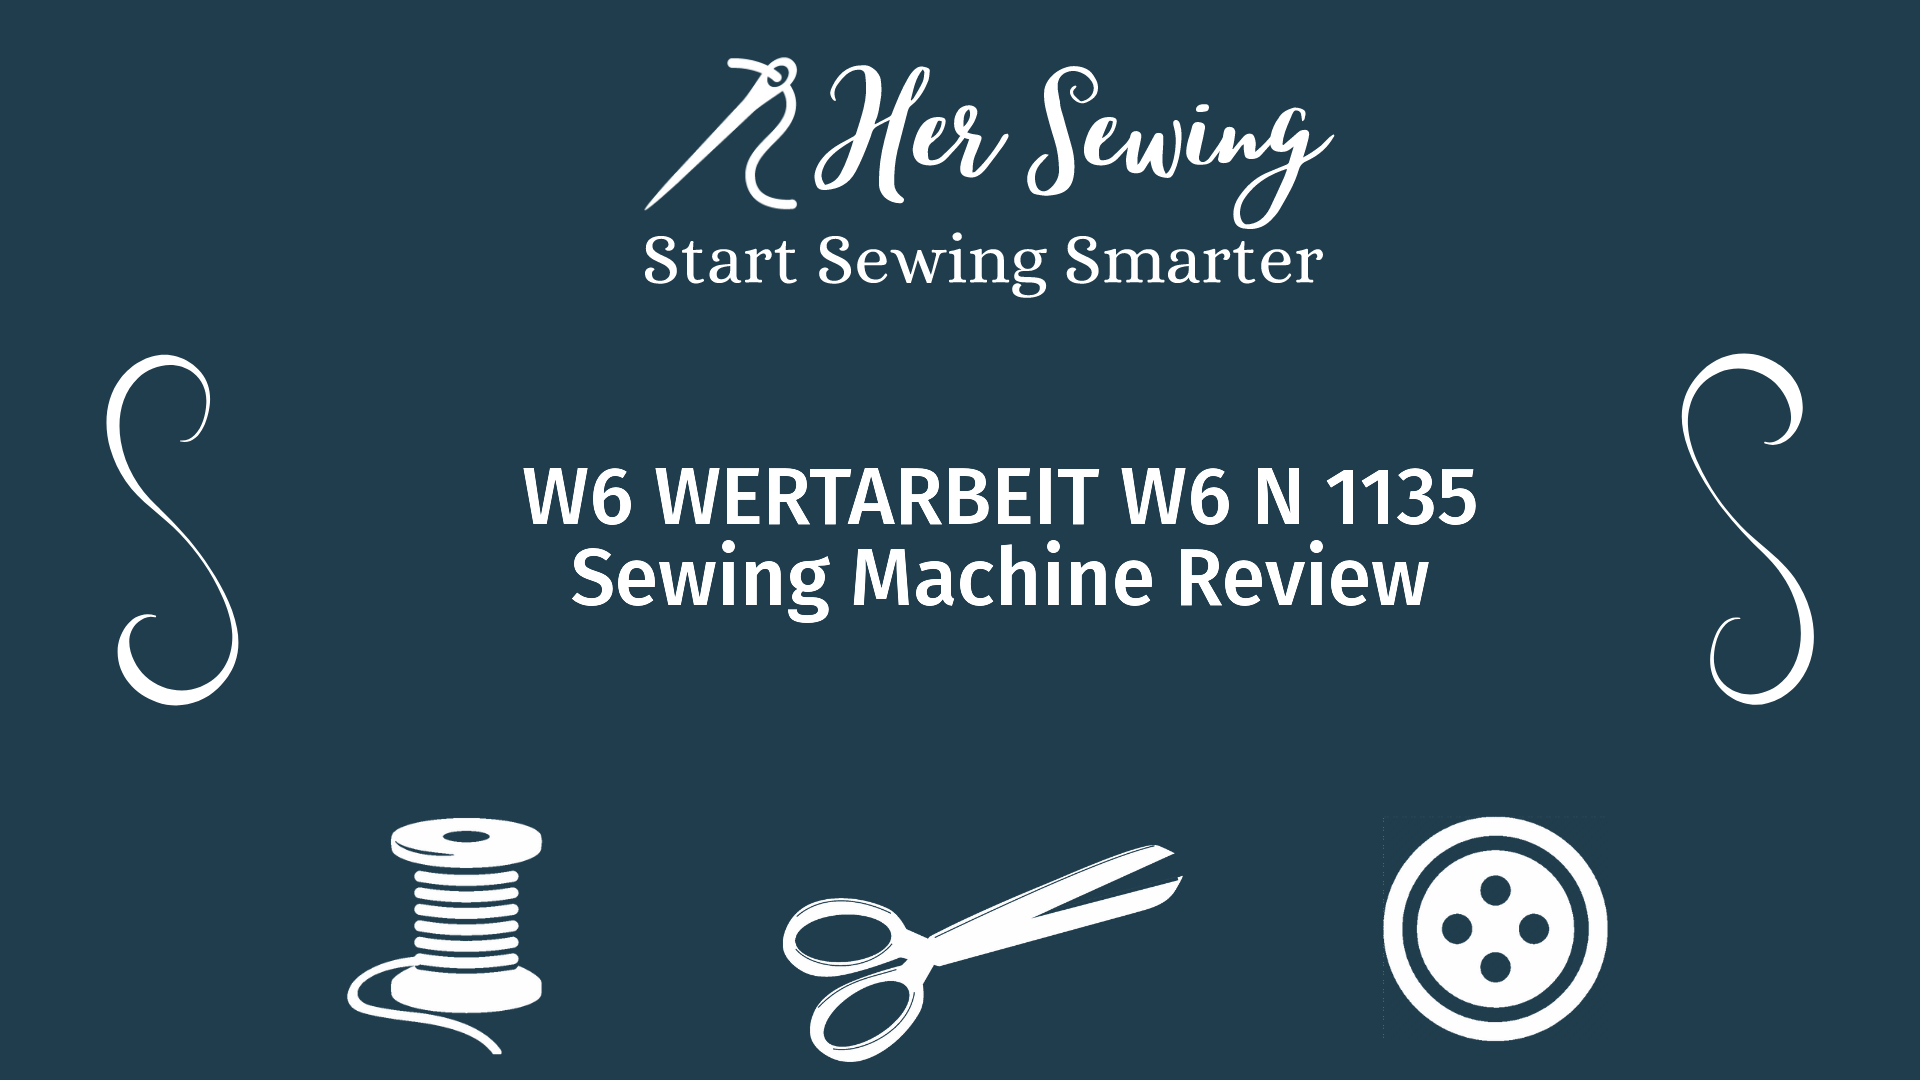 W6 Wertarbeit W6 N 1135 Sewing Machine Review Her Sewing